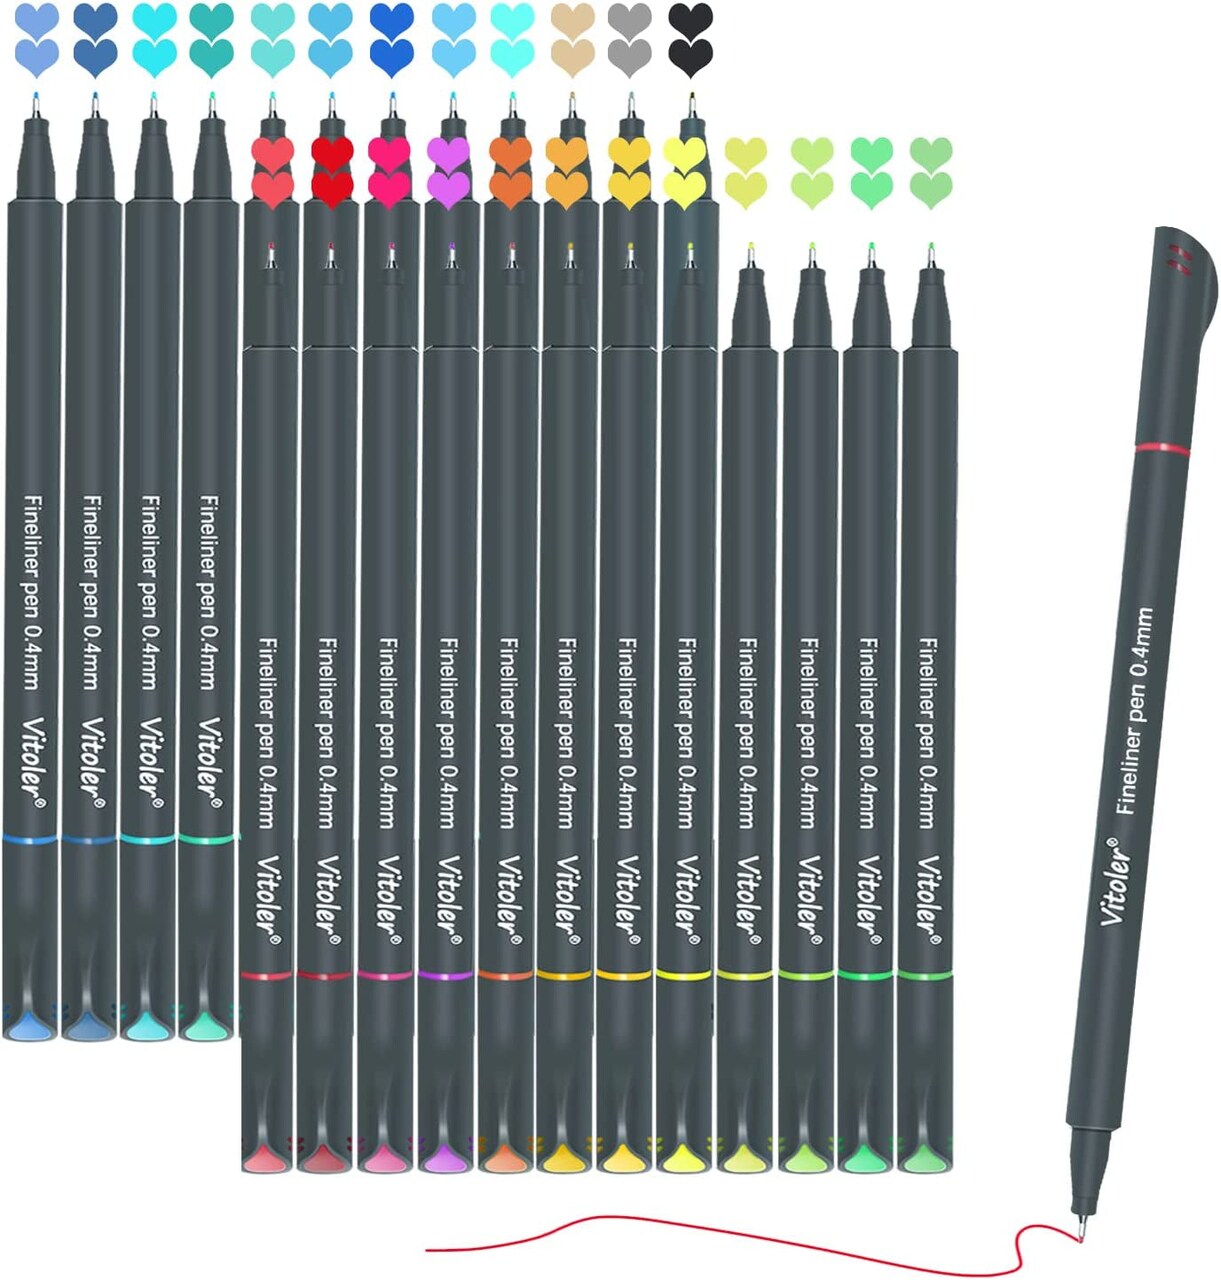 Pens,Colored Pens,Fine Tip Pens,24Pc 0.4Mm Journaling Pens,Colored Fine  Point Pens,School Supplies,Pens for Kids Adult Art Note Taking Drawing  Coloring Office Supplies